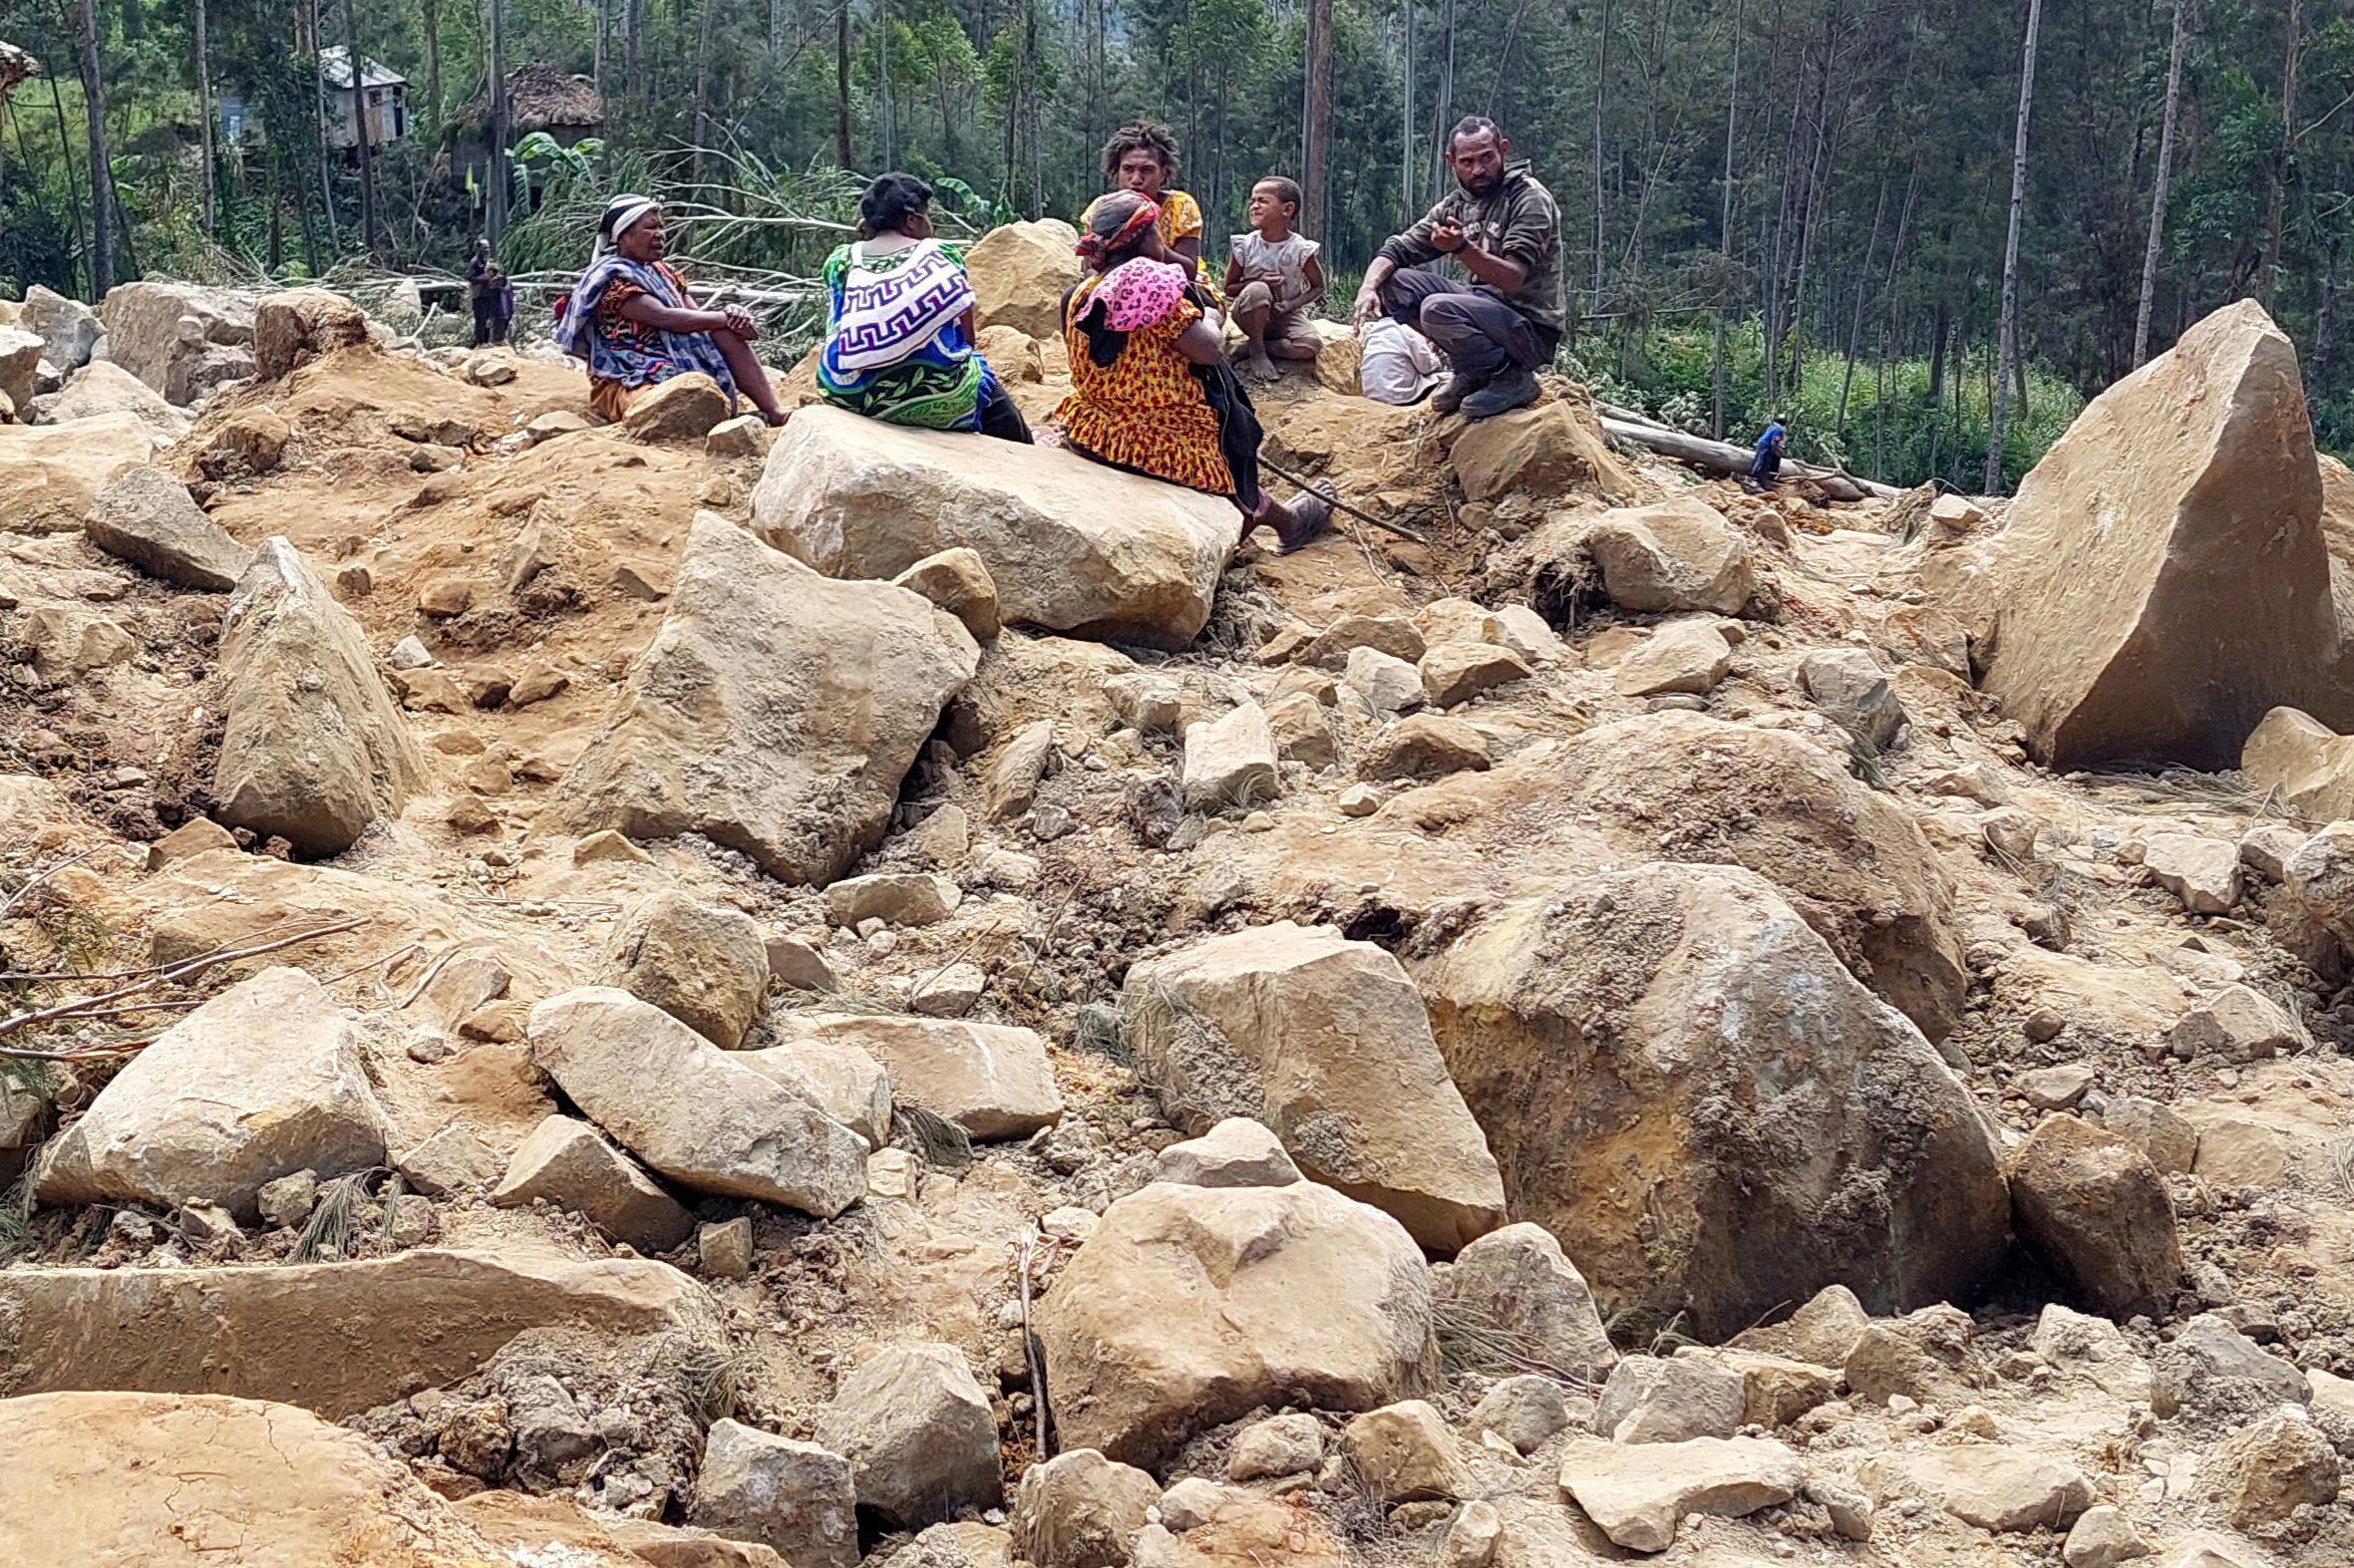 Family members of missing villagers are seen at the site of the landslide in Papua New Guinea’s Enga province. Photo: AFP